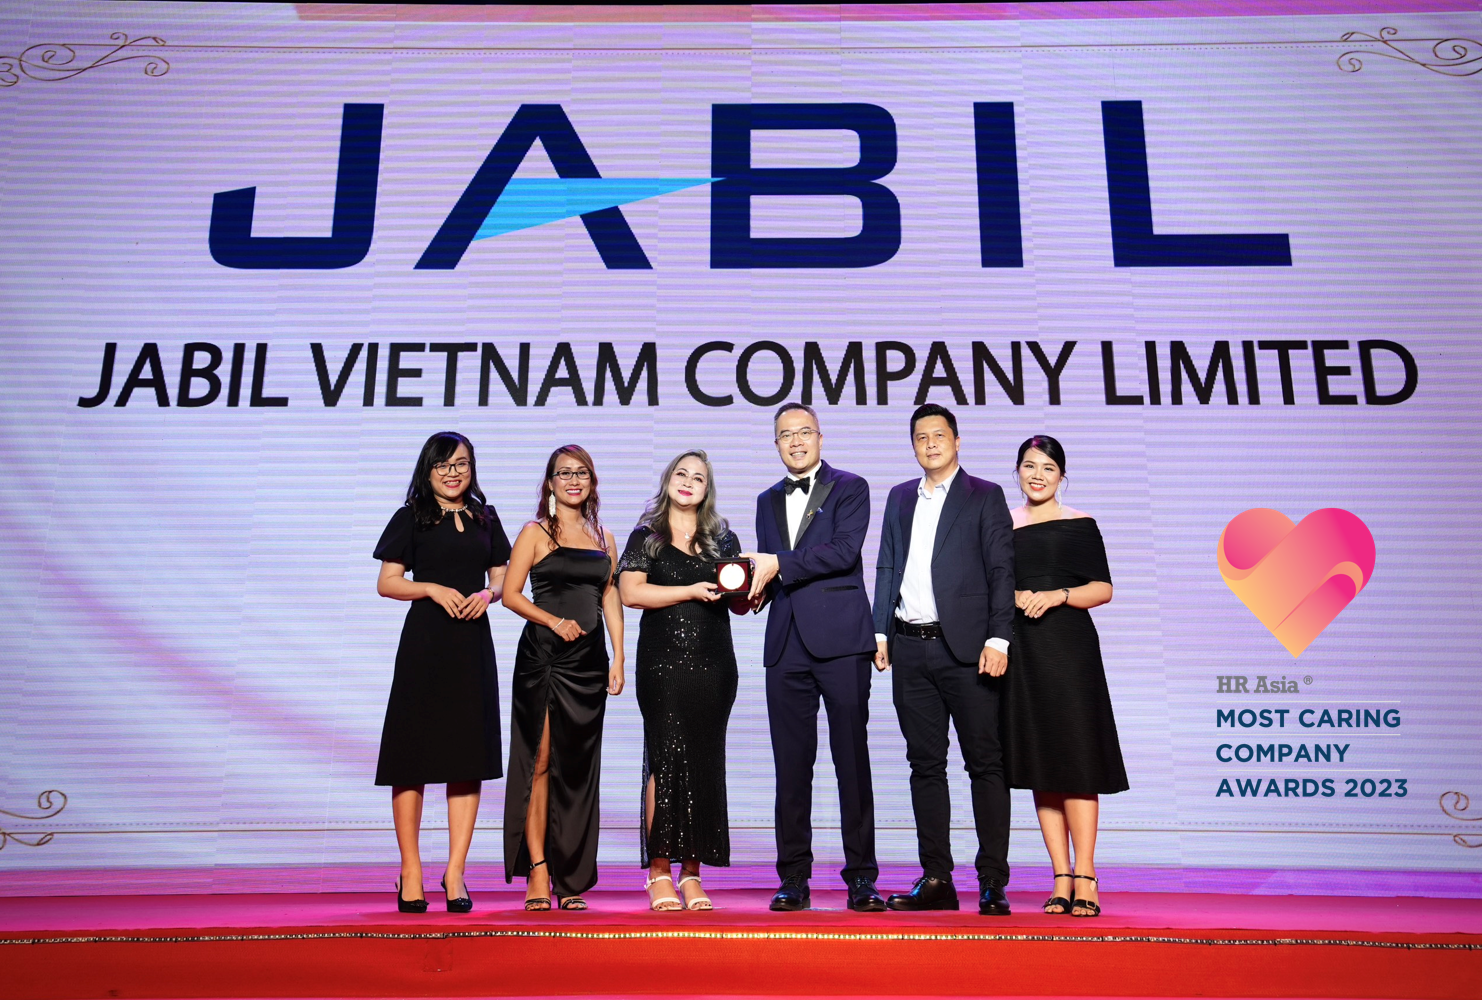 Jabil Vietnam champions diversity, prioritises wellbeing, and leads in innovation